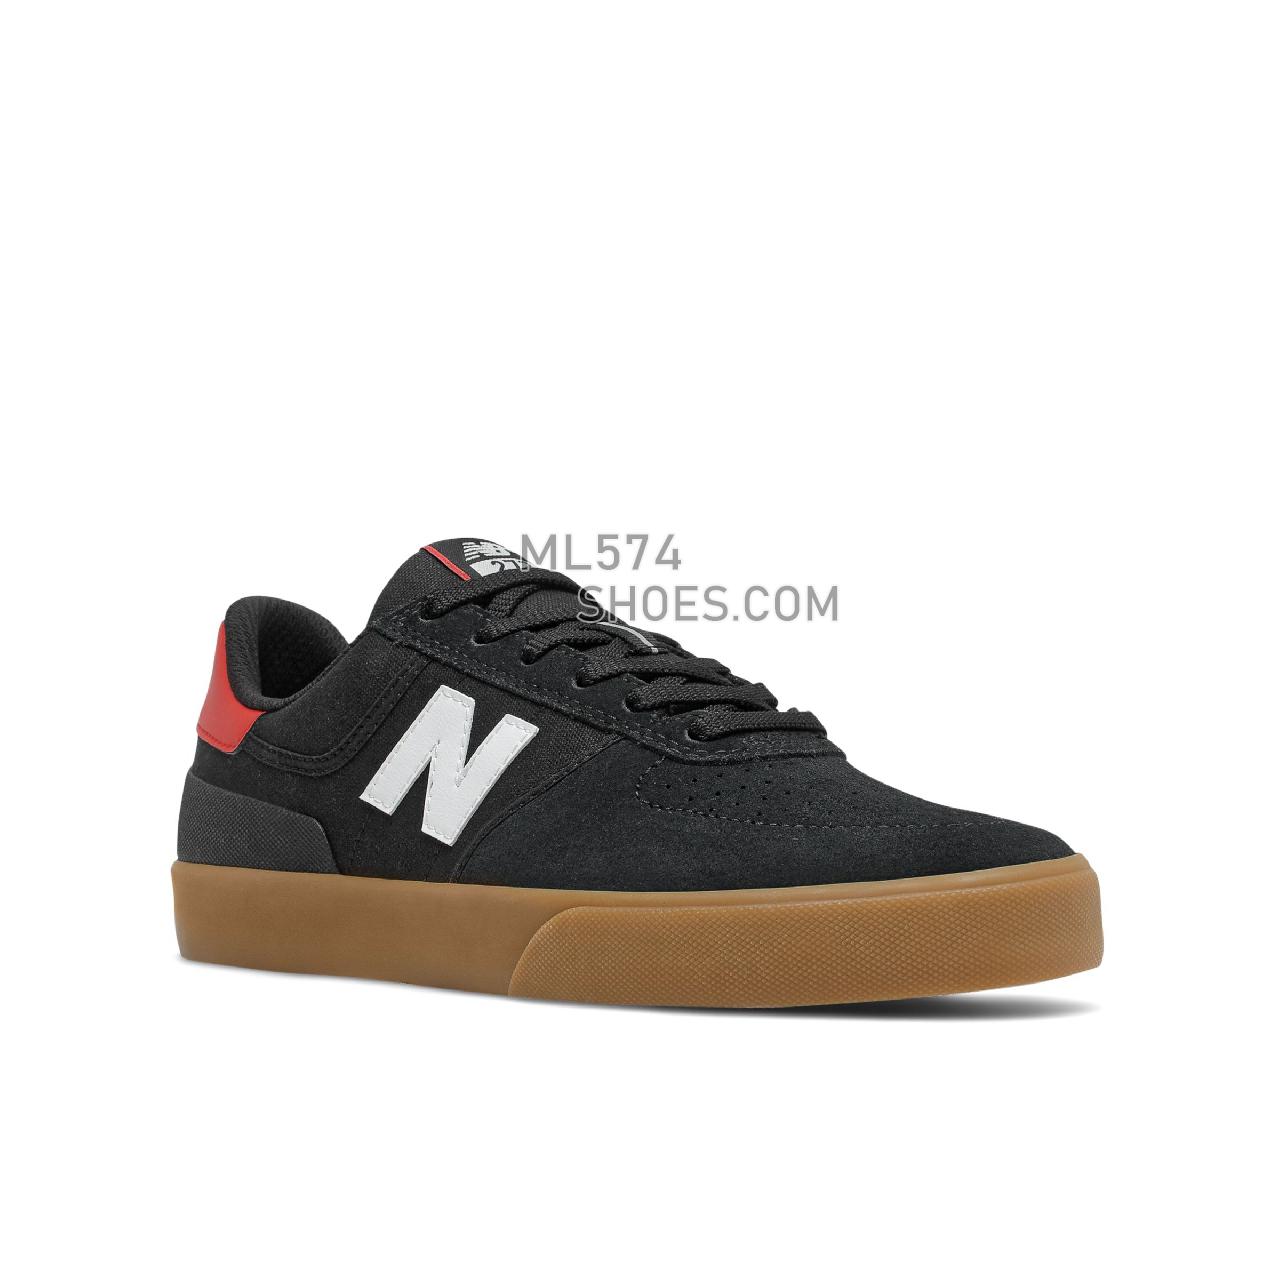 New Balance NB NUMERIC 272 - Men's NB Numeric Skate - Black with White and Red - NM272ADS